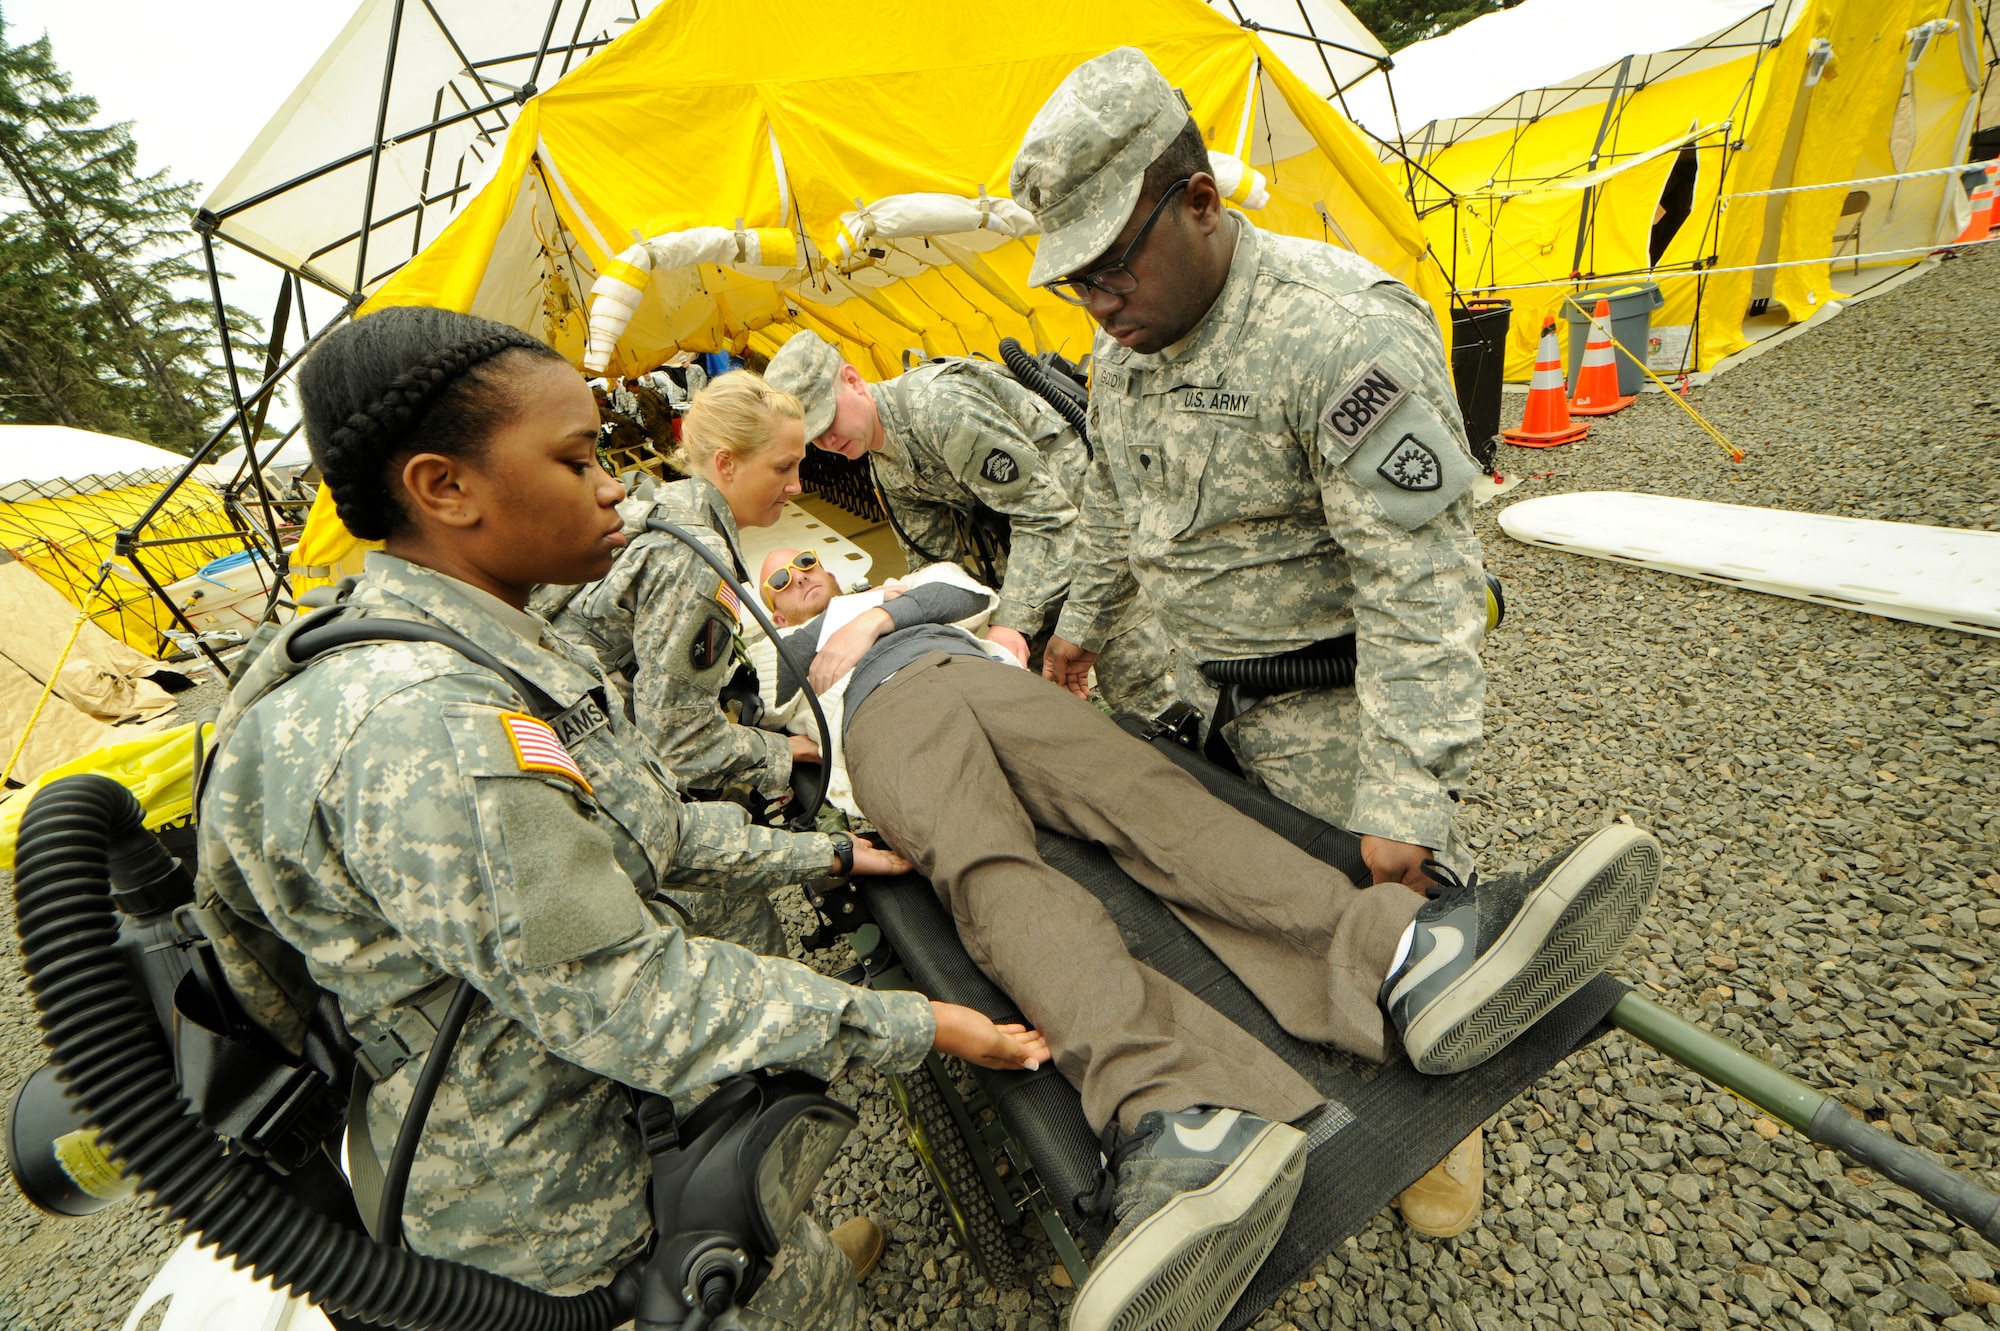 The CBRNE Enhanced Force Response Force Package (CERFP) members from the Oregon and Kentucky National Guard treat injured victims during the Cascadia Rising exercise at Camp Rilea, Warrenton, Ore., June 9, 2016. Cascadia Rising scenario is a 9.0 magnitude earthquake along the Cascadia Subduction Zone (CSZ) resulting in a tsunami, testing first responders, emergency management and public safety officials in the Pacific Northwest. (U.S. Air National Guard photo by Tech. Sgt. John Hughel, 142nd Fighter Wing Public Affairs/Released)